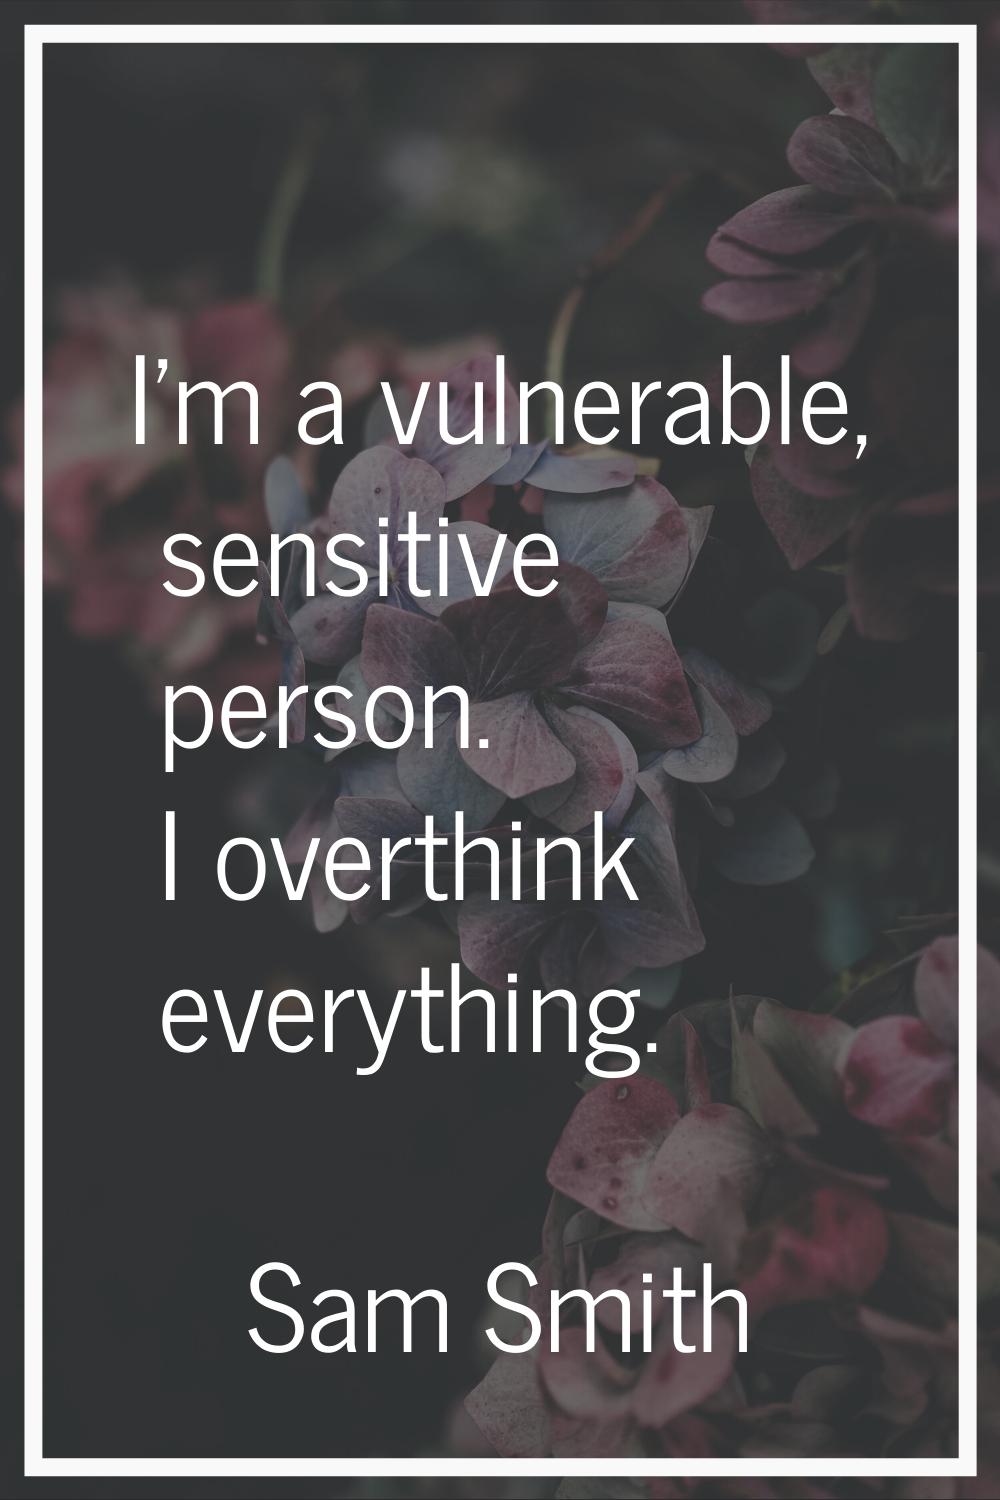 I'm a vulnerable, sensitive person. I overthink everything.